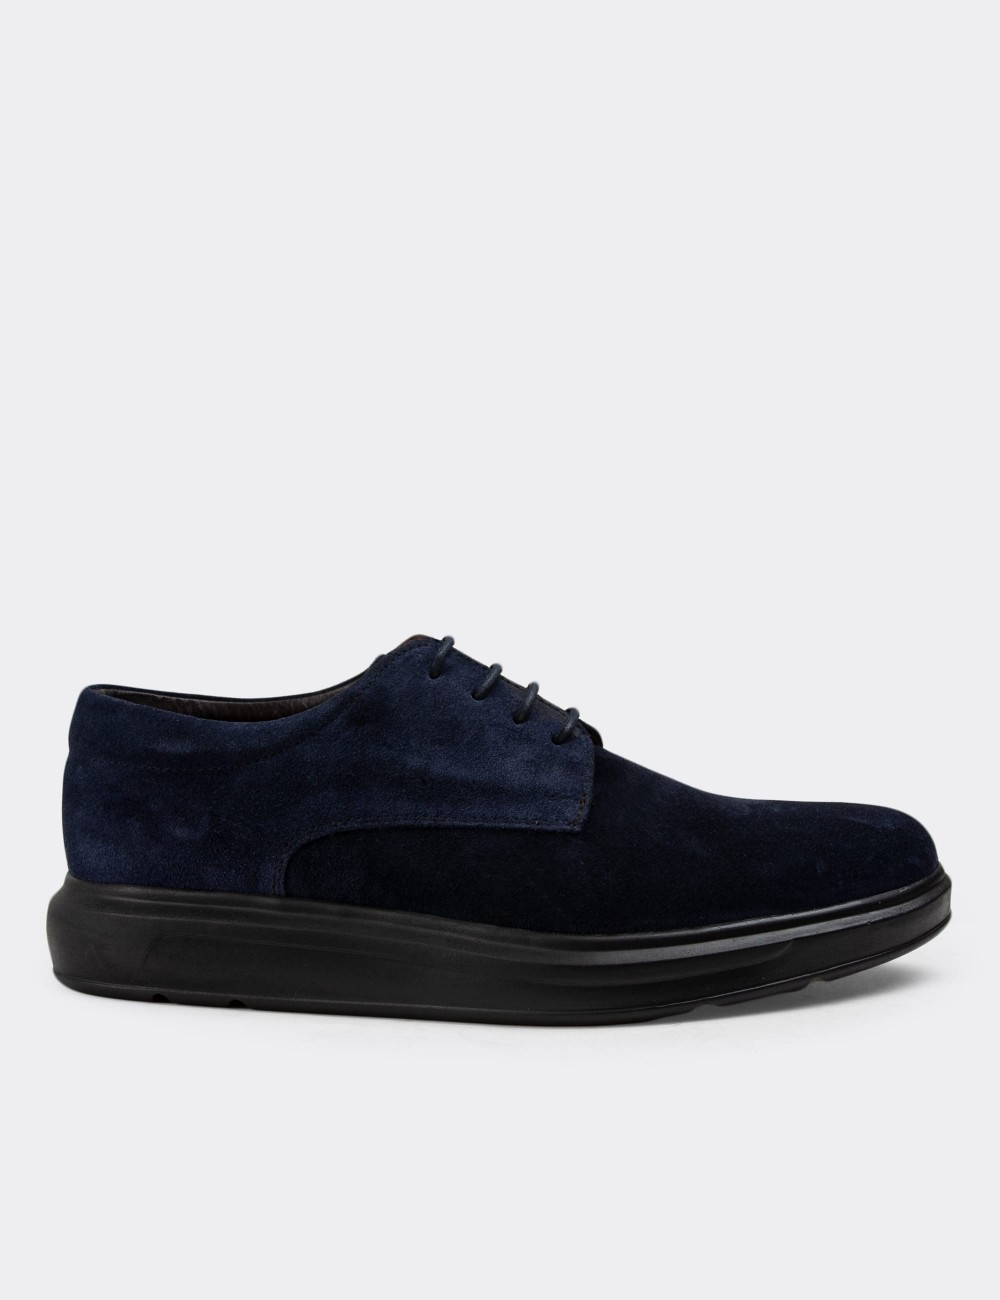 Navy Suede Leather Lace-up Shoes - 01934MLCVP02